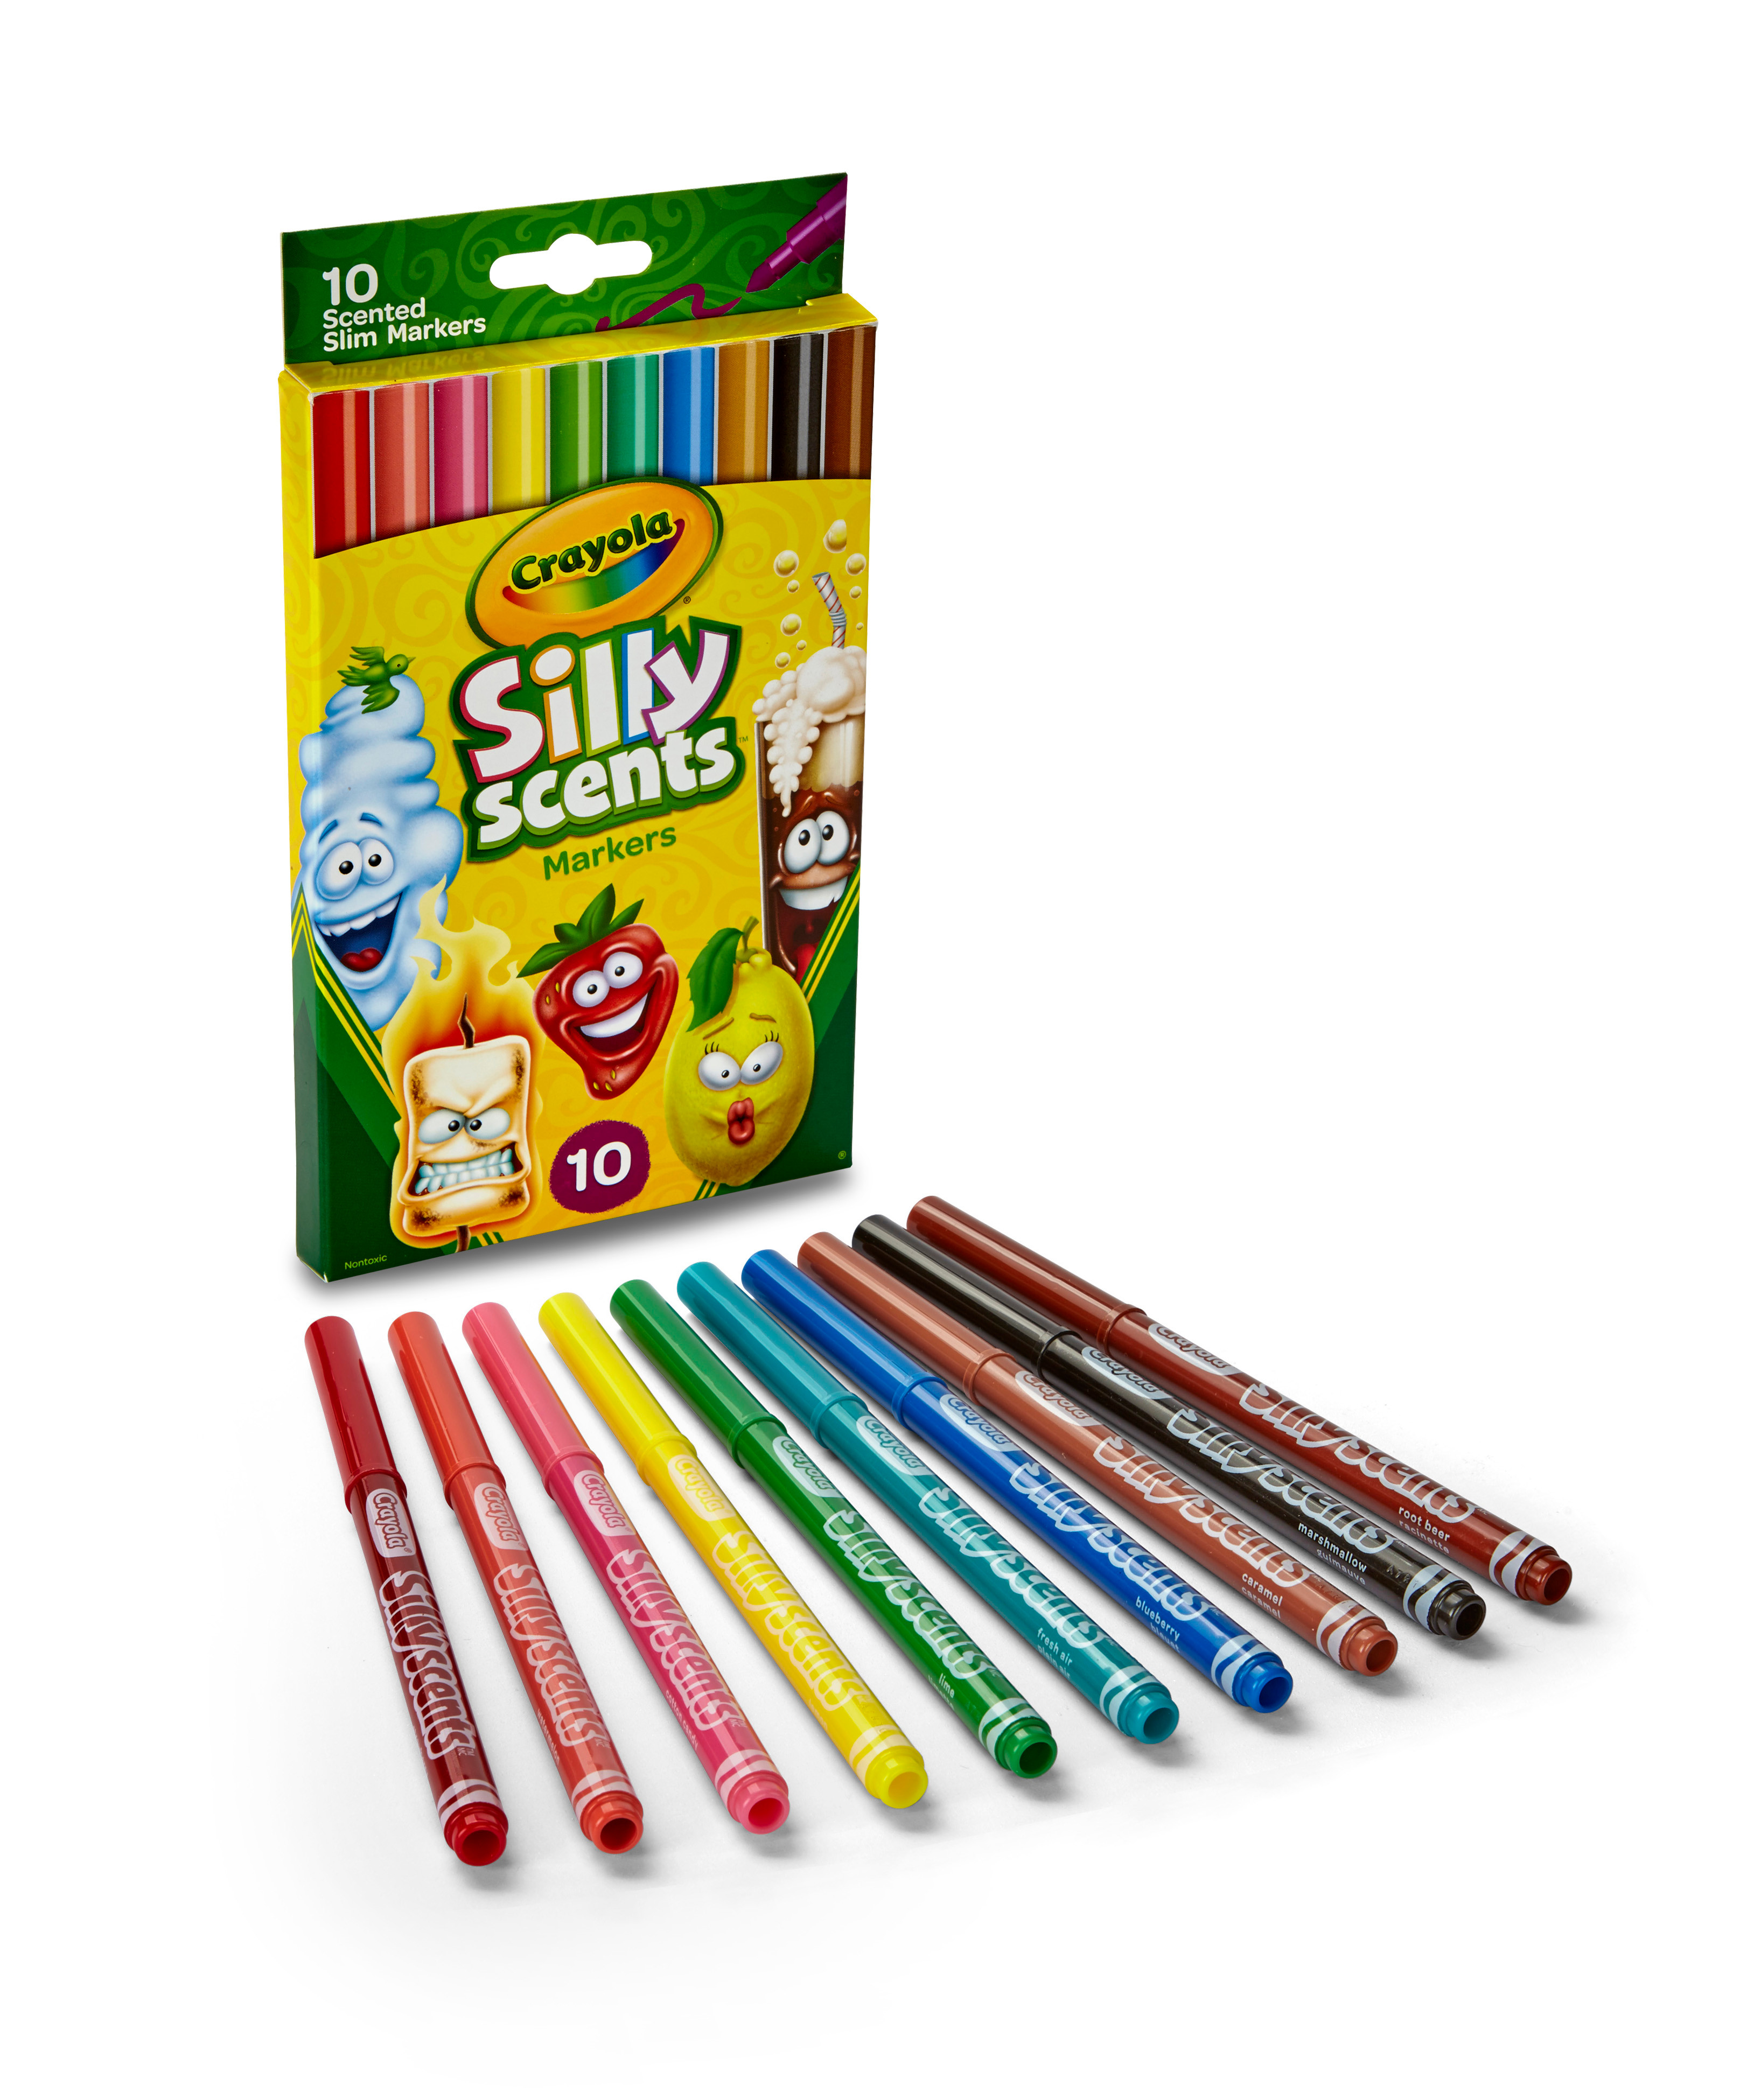 Siily Scents Crayola Crayons Tubs ... Markers Colour Wonder Pencils Paints 